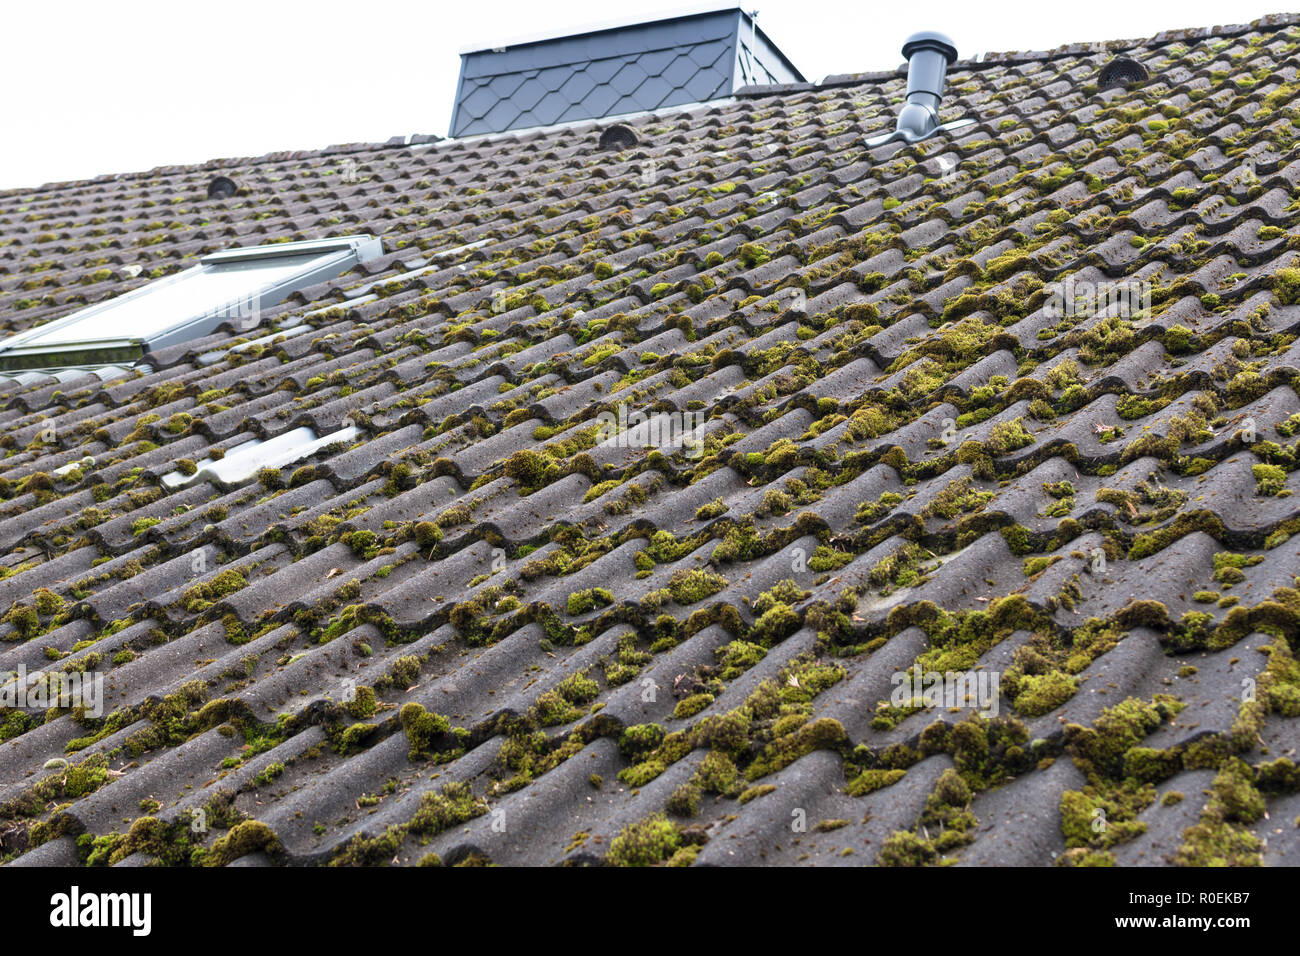 Roof tiles covered by moss Stock Photo